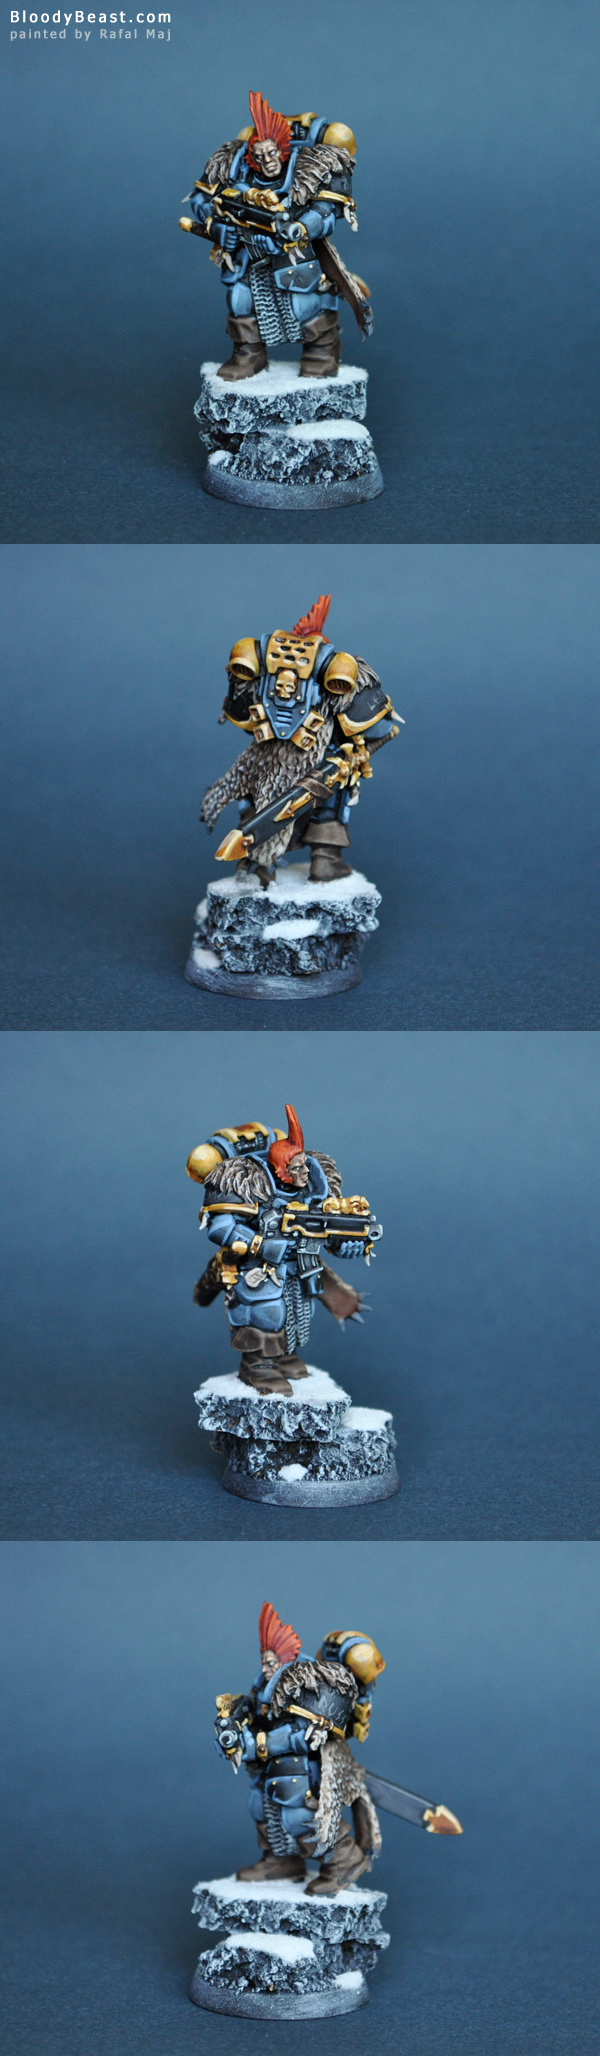 Space Wolves Lone Wolf painted by Rafal Maj (BloodyBeast.com)